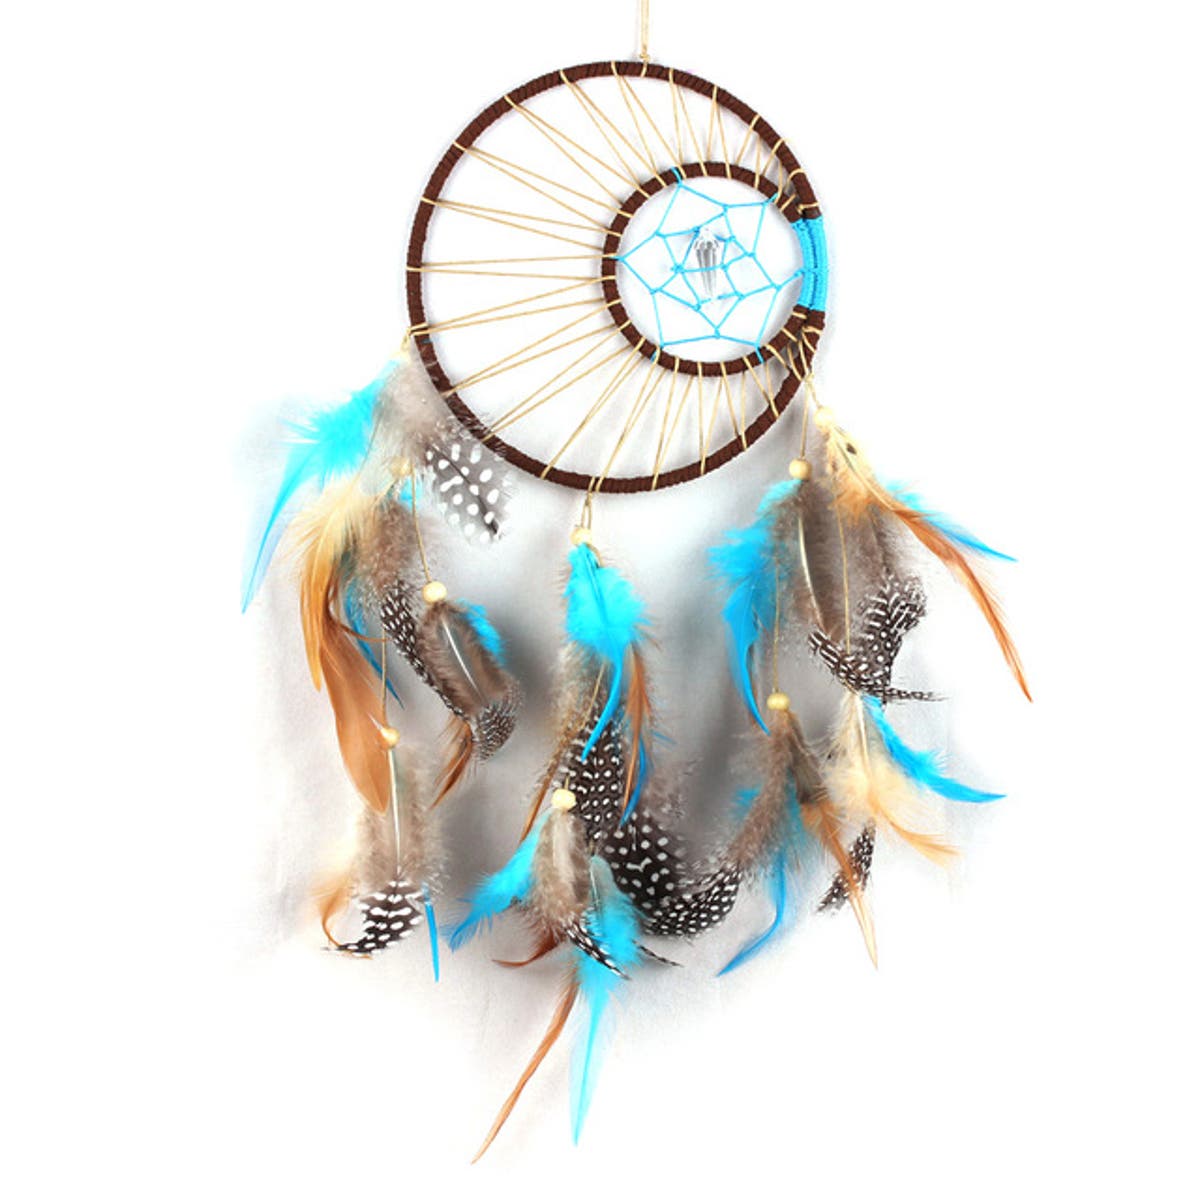  Dreamcatcher: Powerful Protective Amulet Of North American  